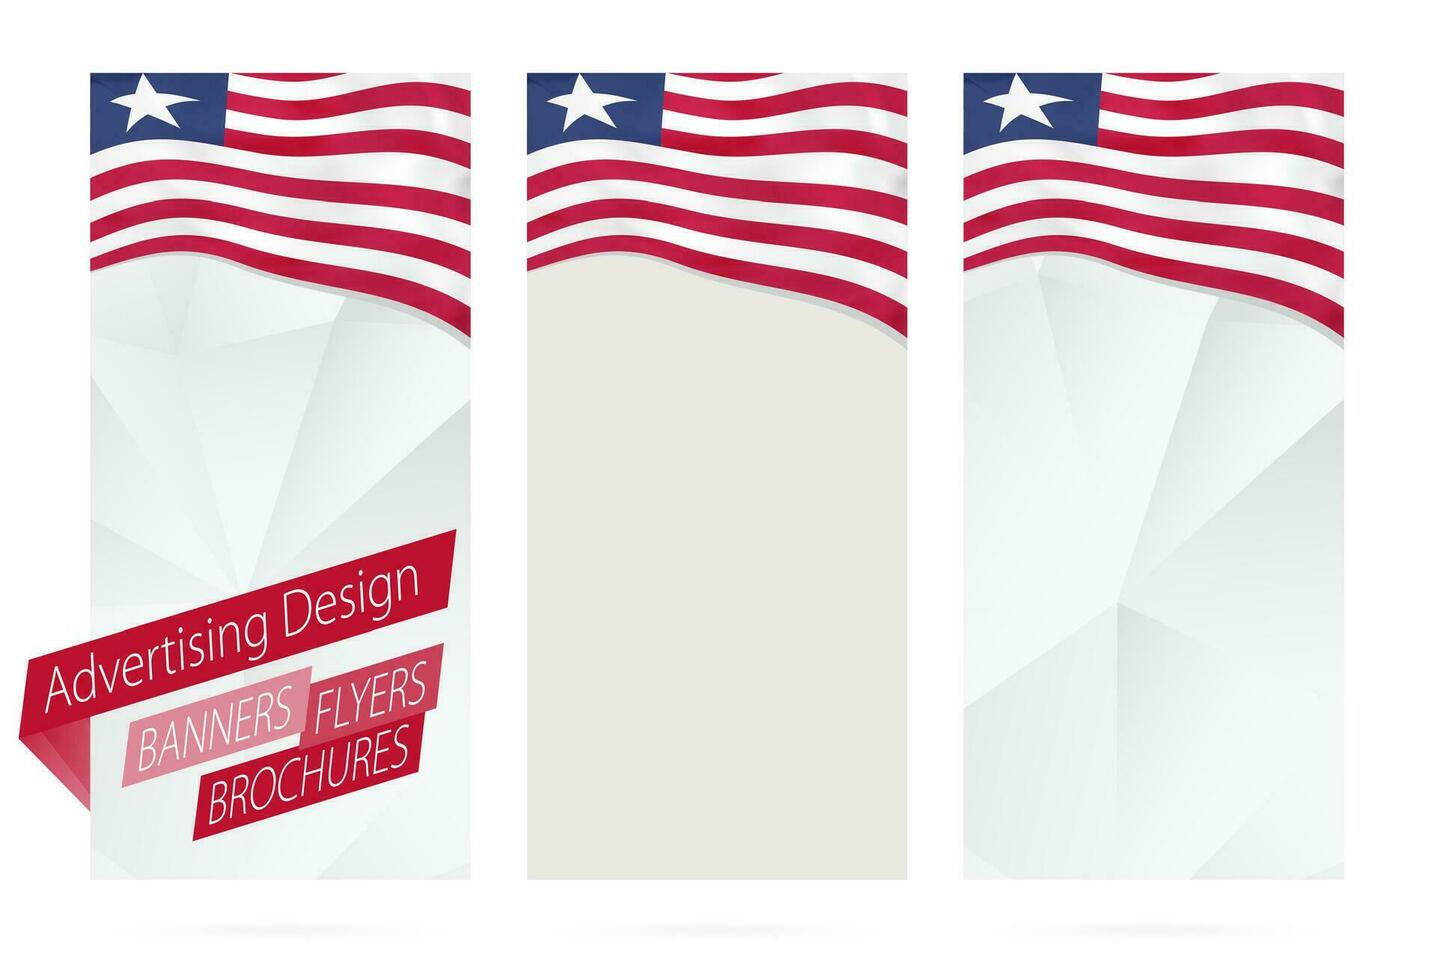 Design of banners, flyers, brochures with flag of Liberia. vector